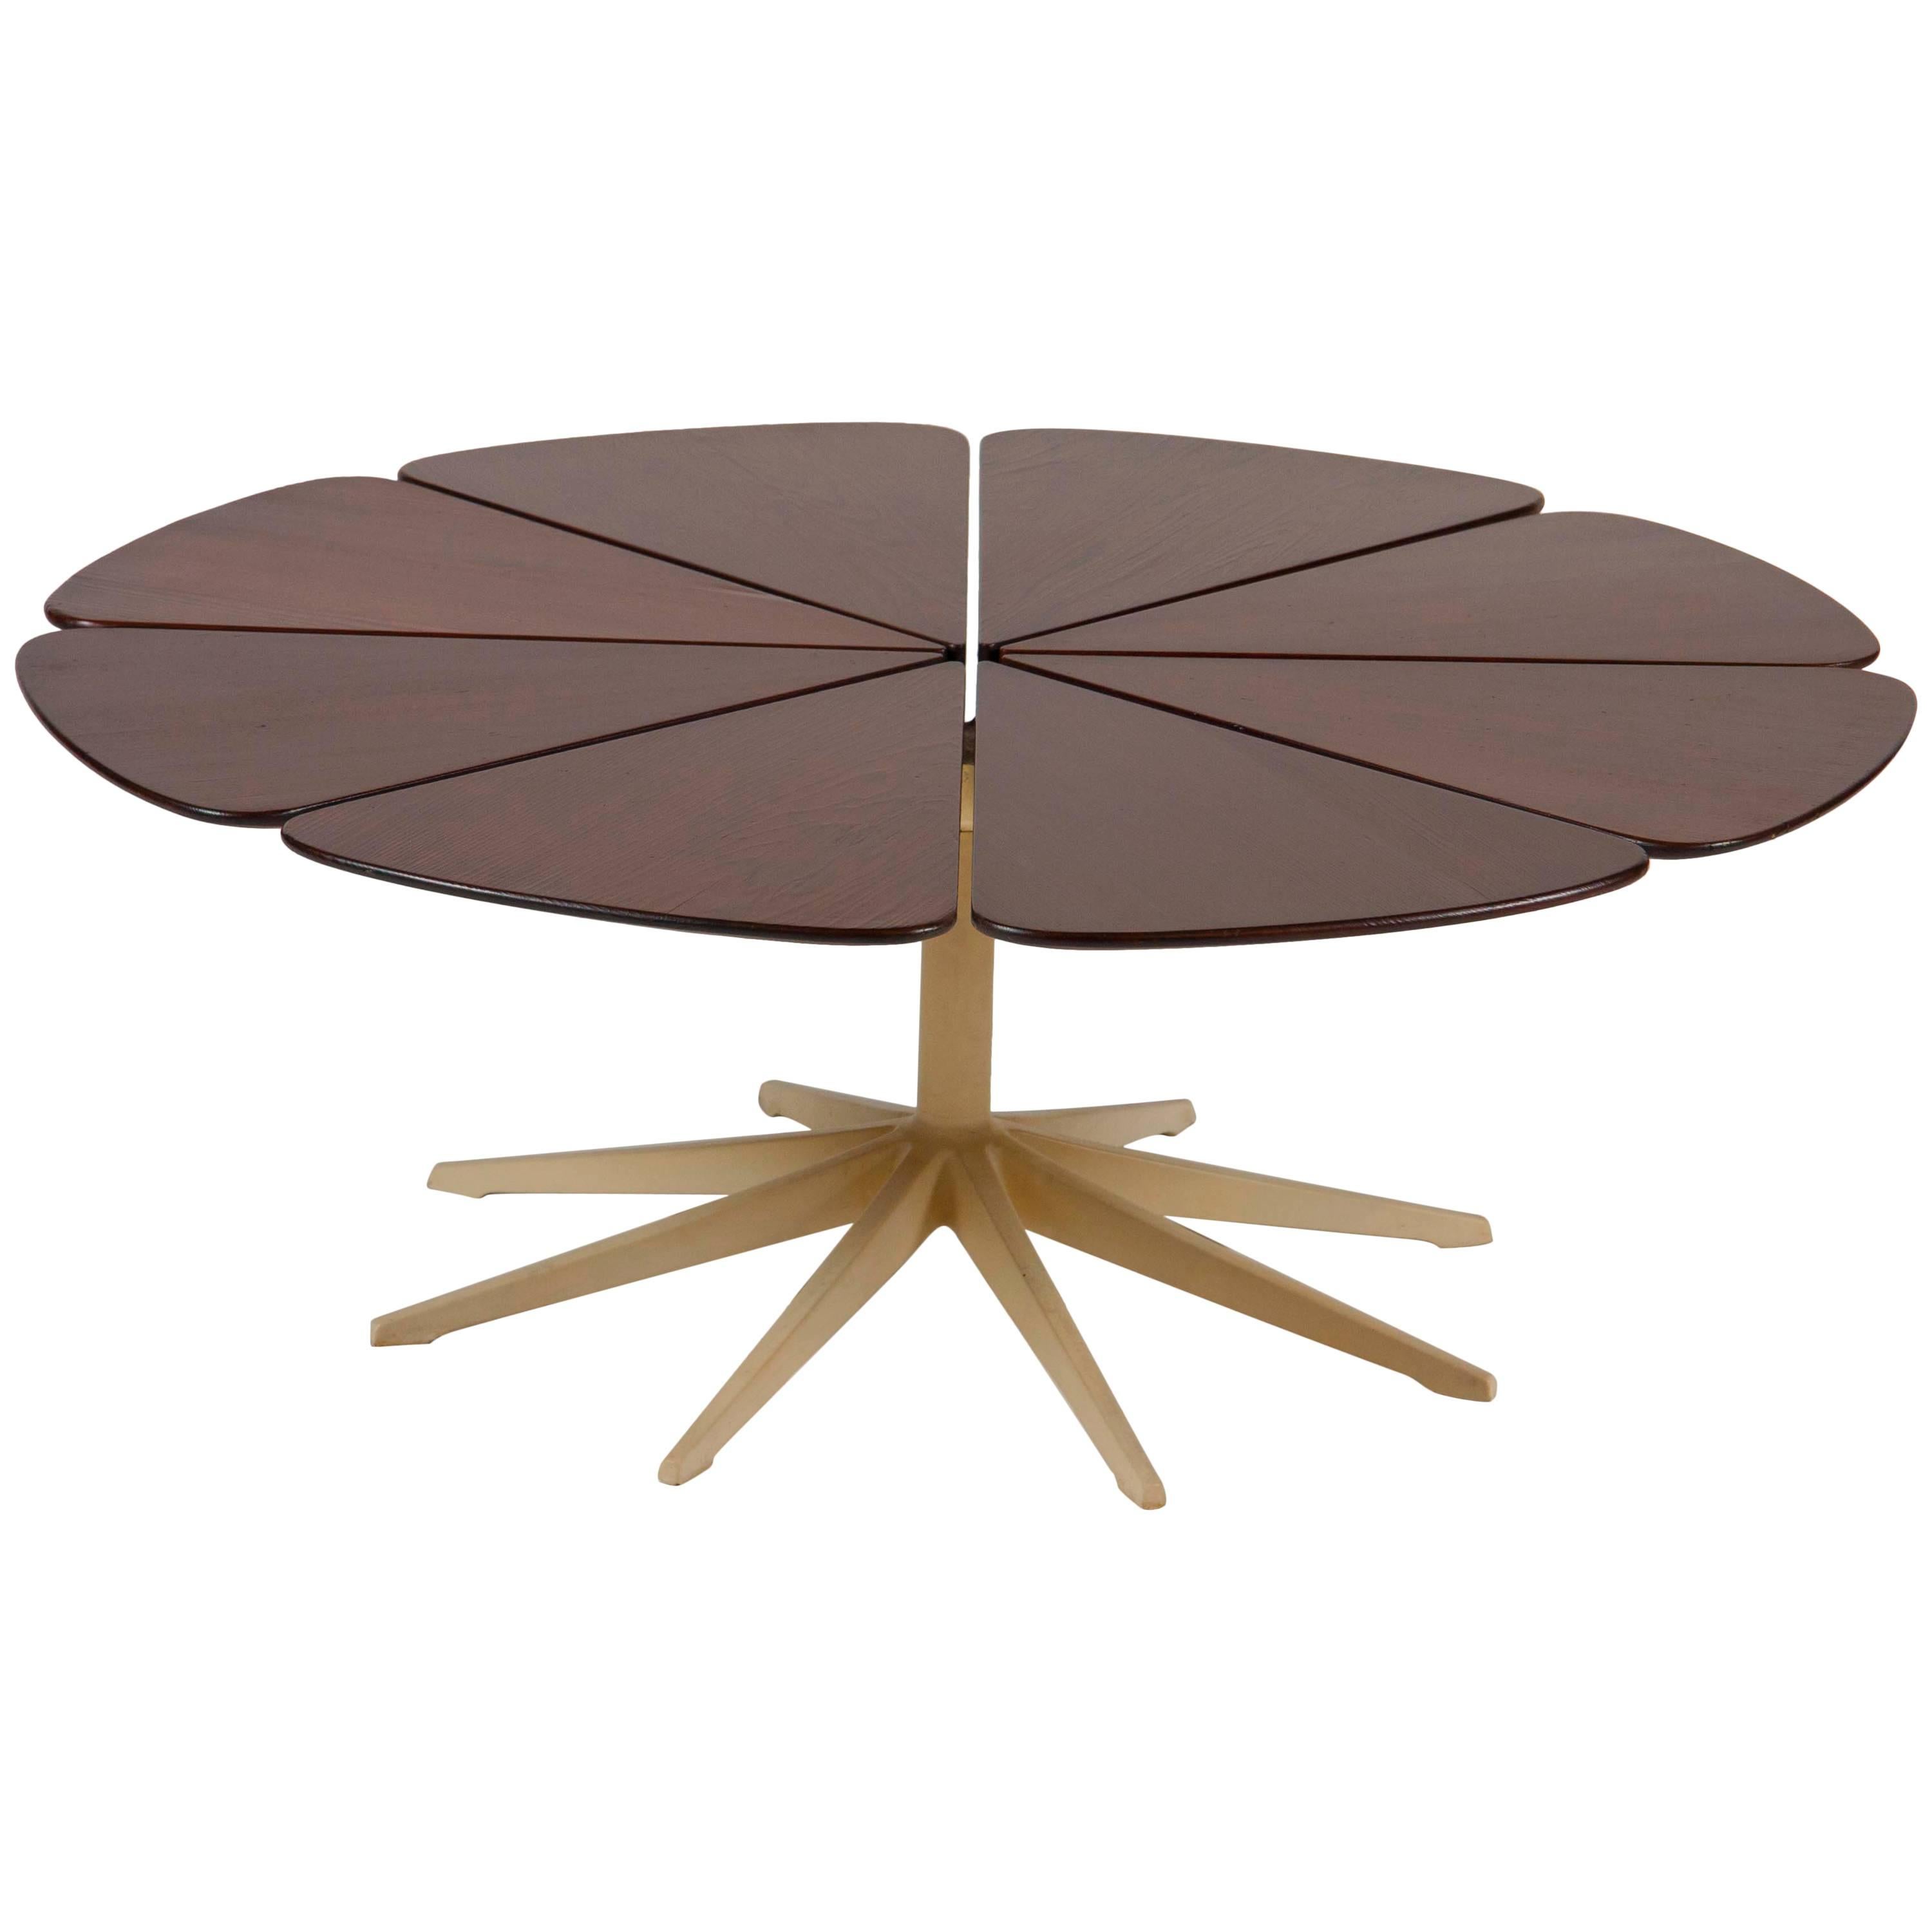 Richard Schultz Redwood Petal Coffee Table Made by Knoll For Sale